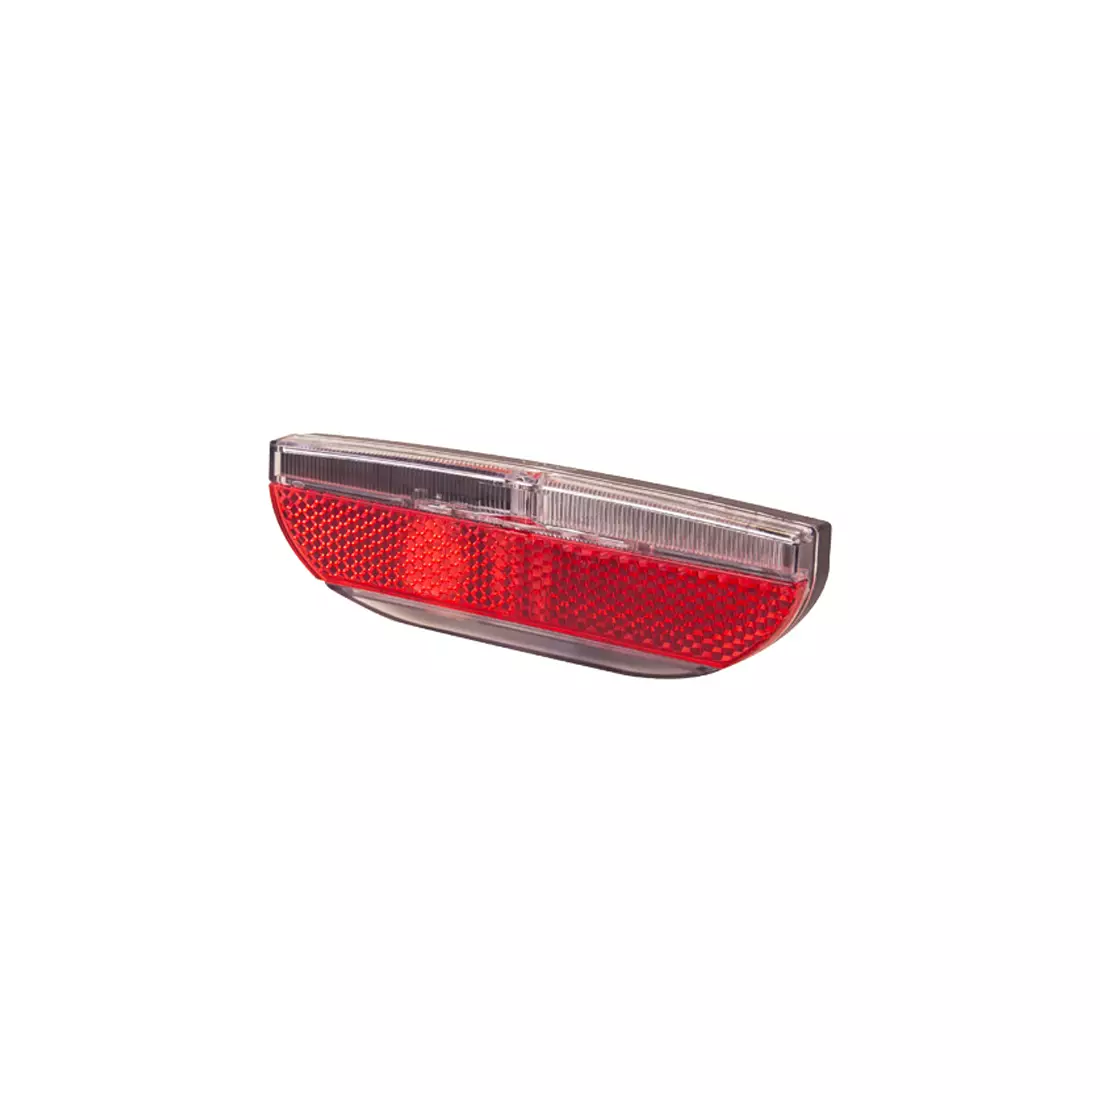 SPANNINGA VIVO XDS Rear bicycle lamp on the rack under the dynamo SNG-R623008